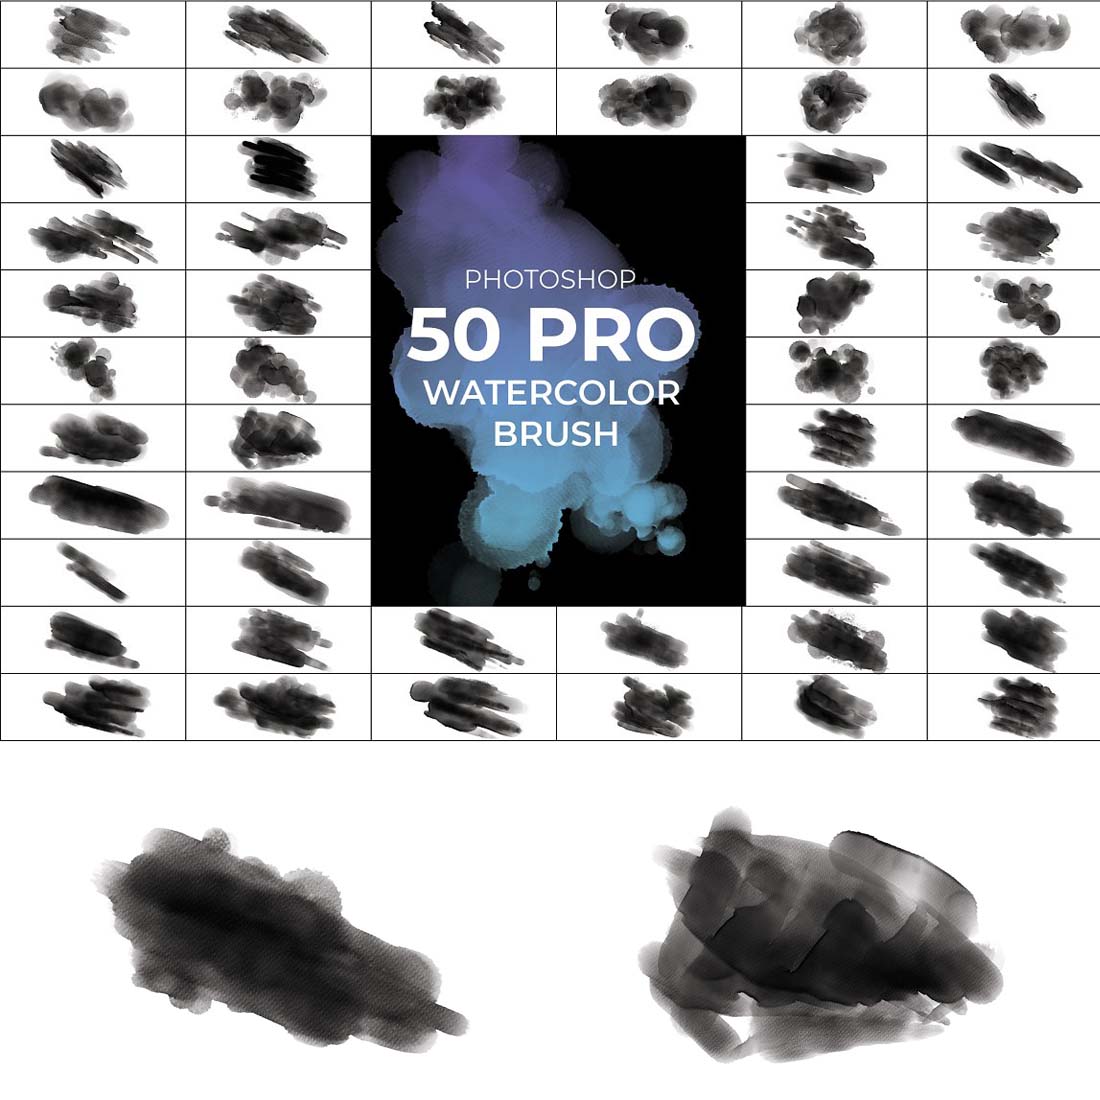 Pro Watercolor Photoshop Brush cover image.